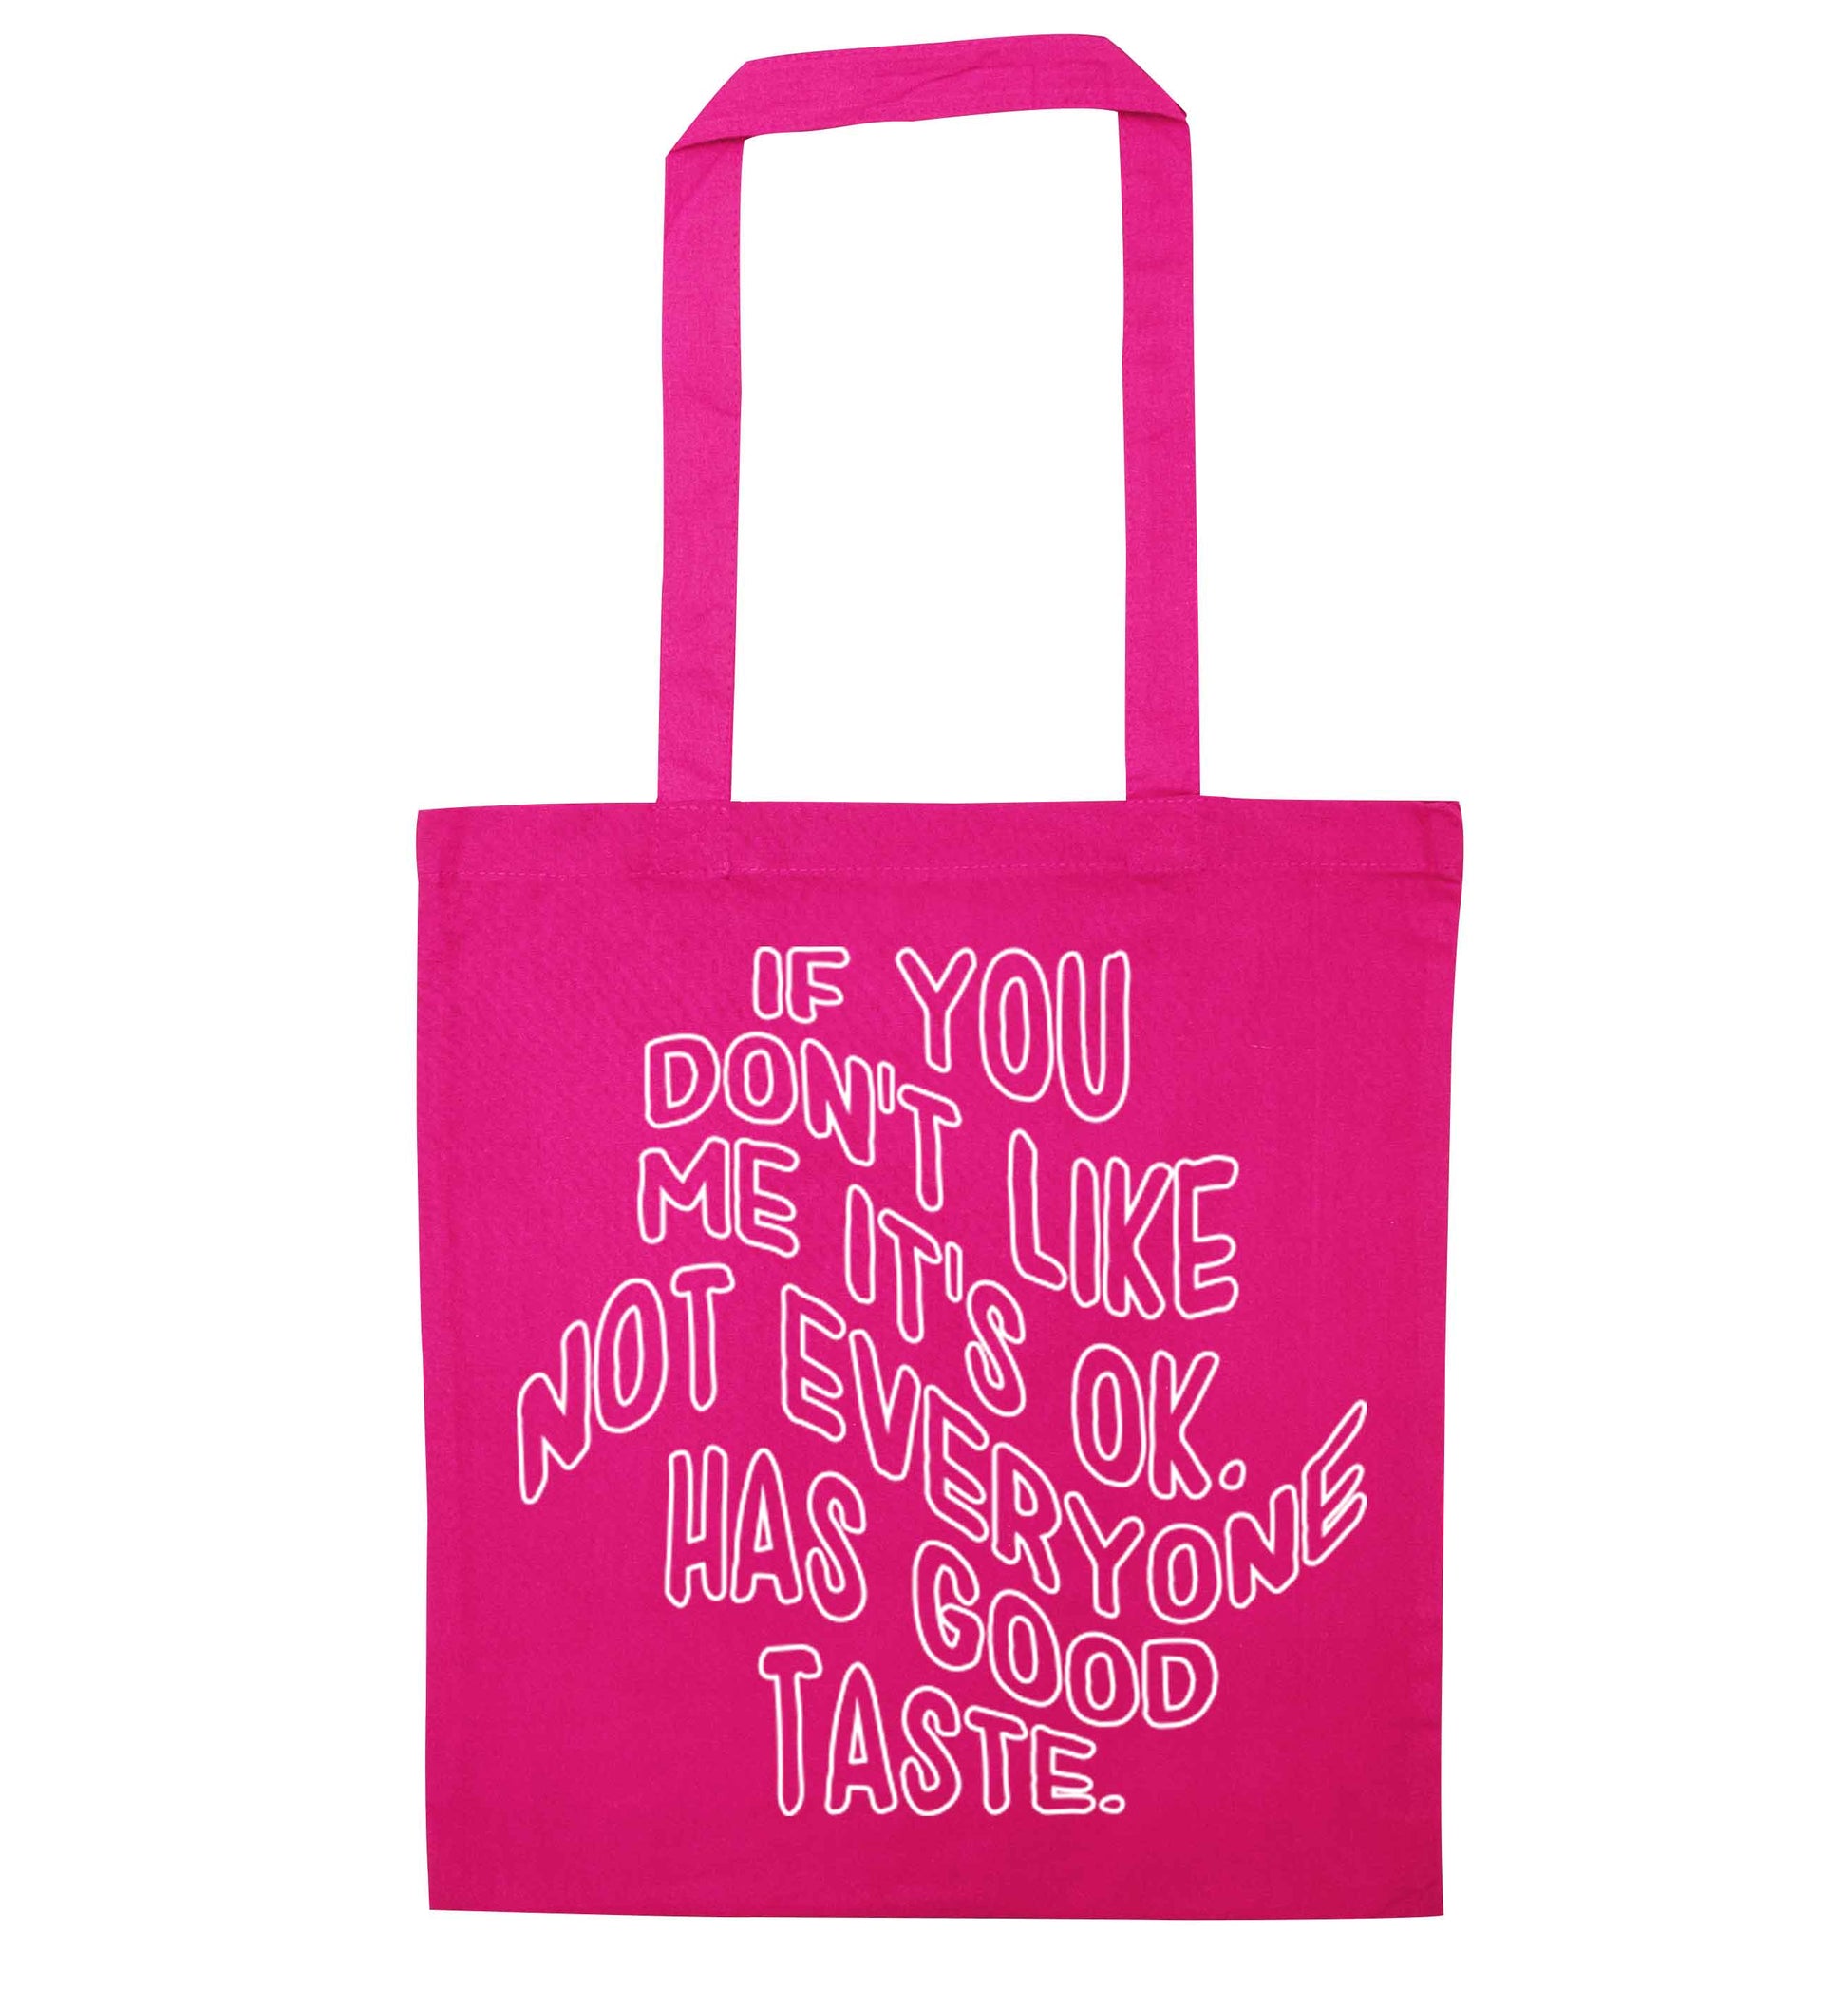 If you don't like me it's ok not everyone has good taste pink tote bag